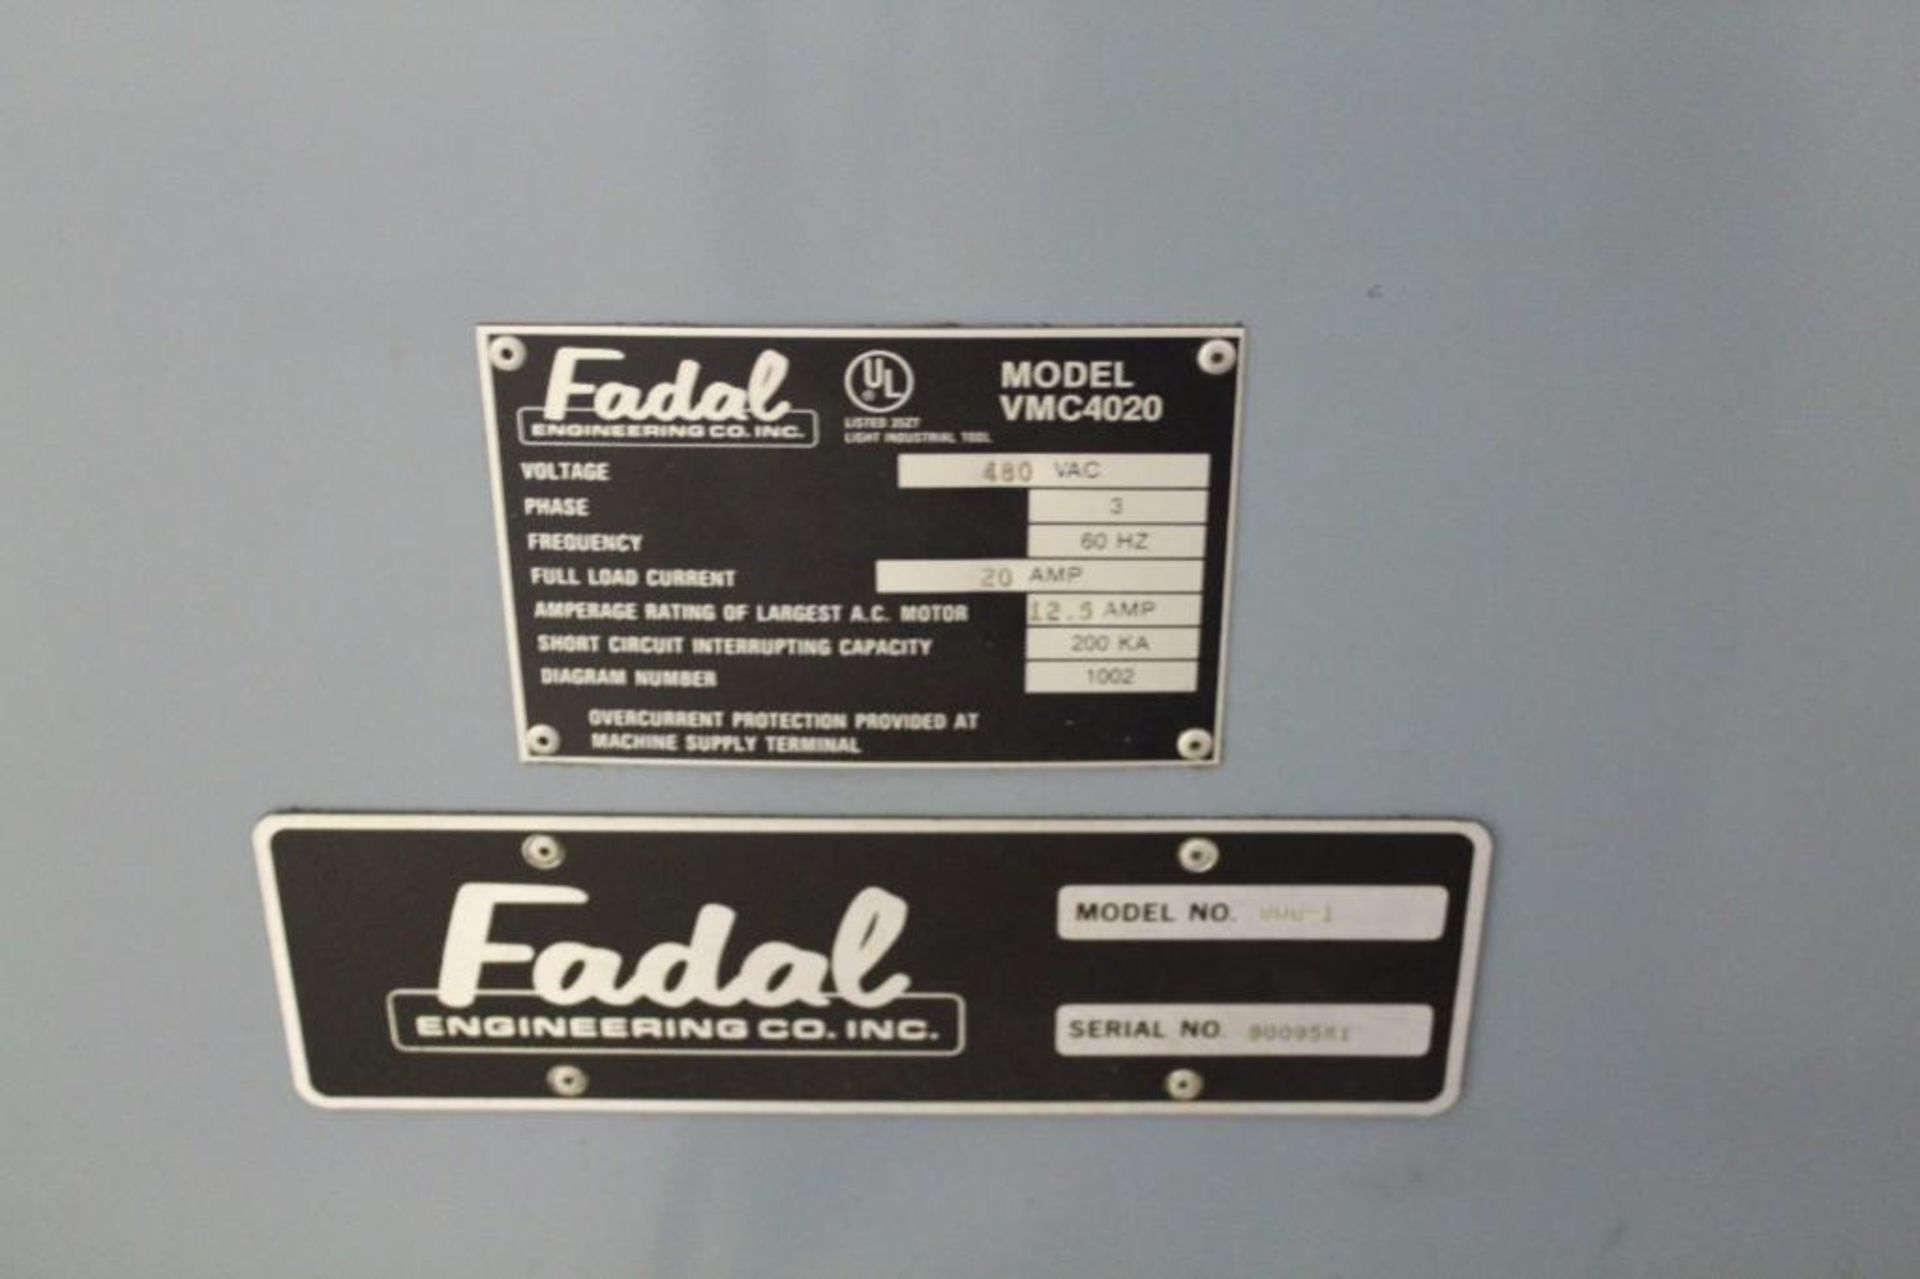 Fadal4020 VMC Vertical Machining Center.(video) 40" x 20" x 20" Travel, 10,000 RPM spindle Coolant S - Image 7 of 8